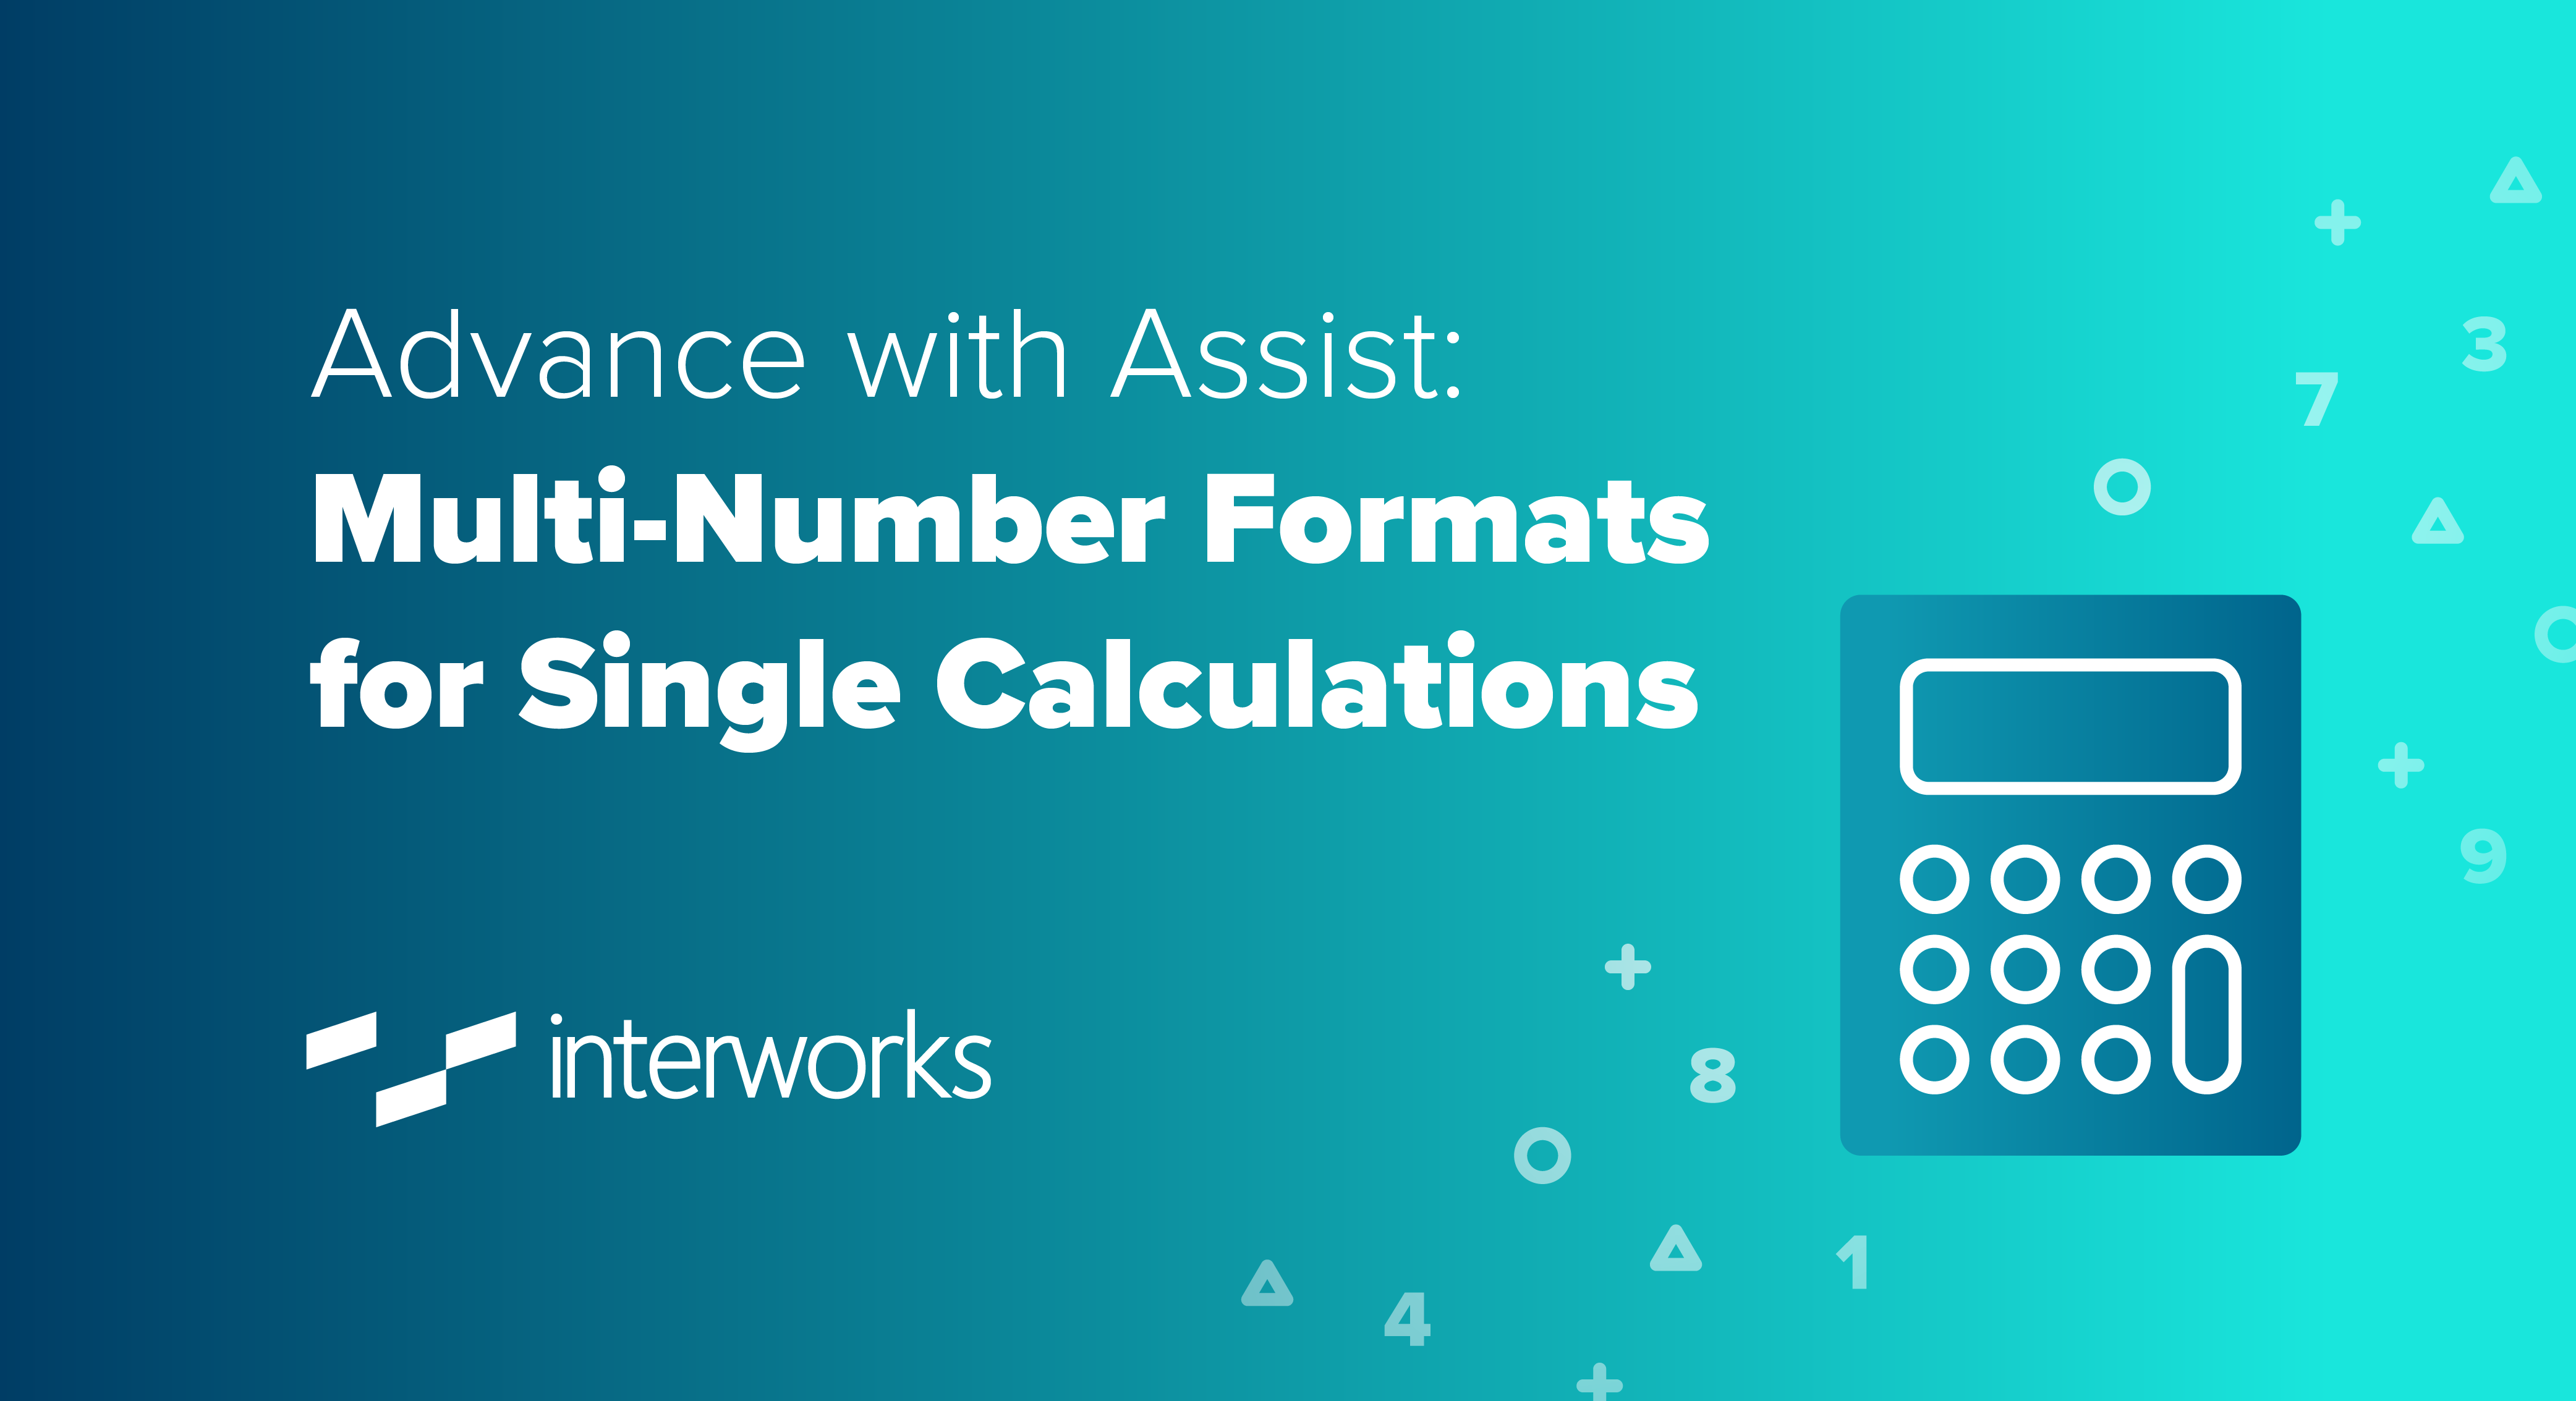 Advance with Assist: Multi-Number Formats for Single Calculations